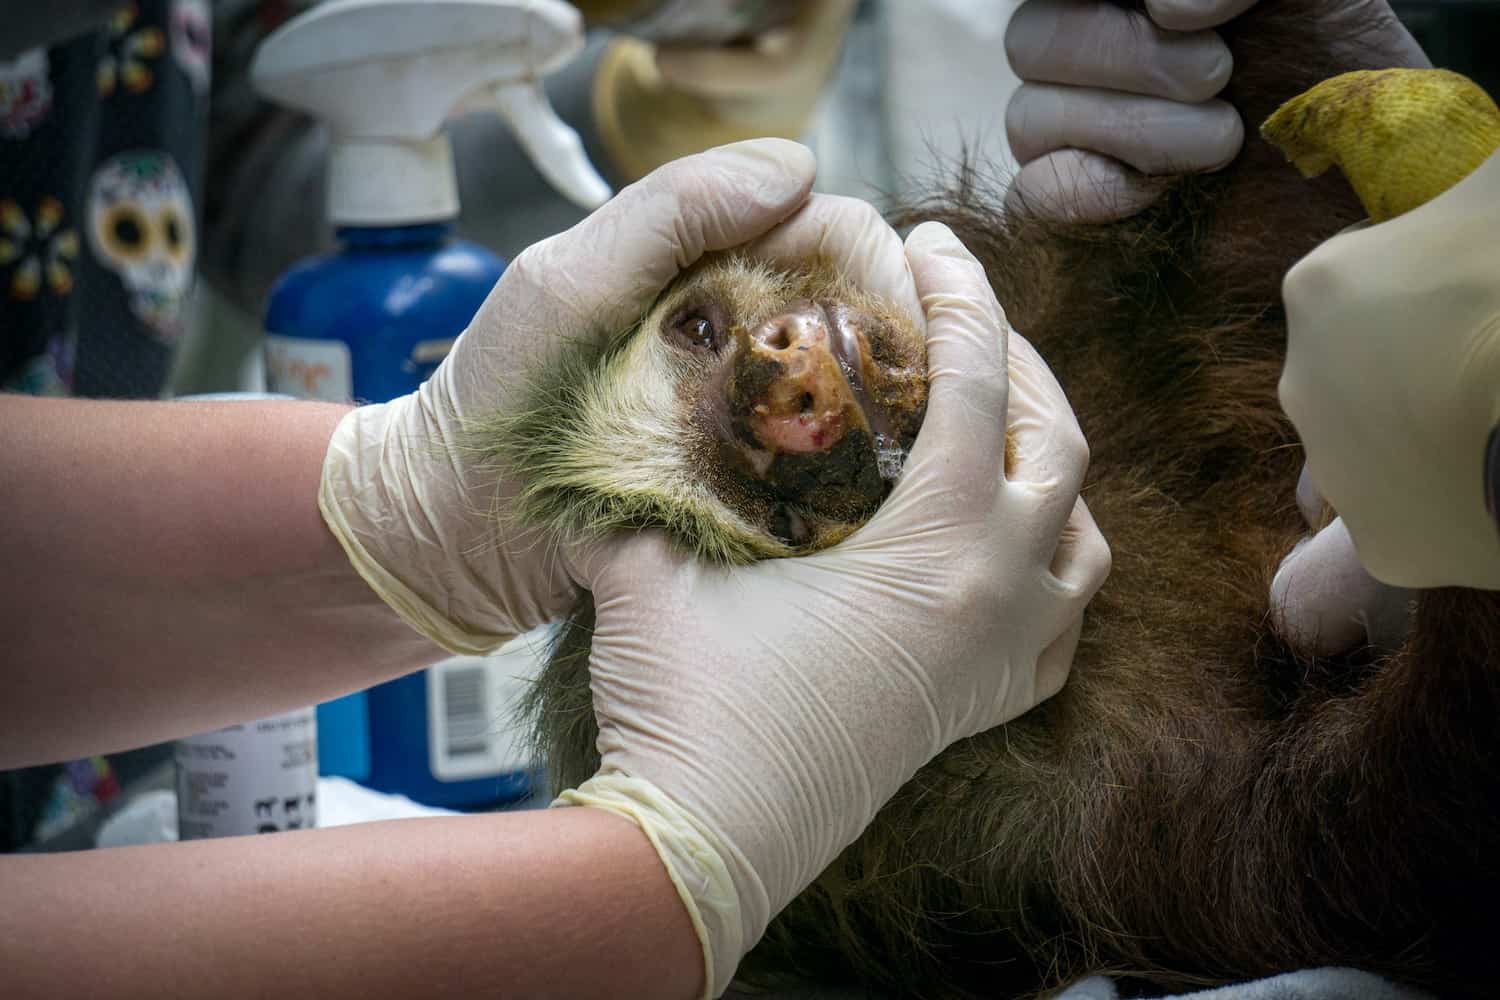 Toucan Rescue Ranch is one organization in Costa Rica that helps treat and rehabilitate electrocuted sloths.